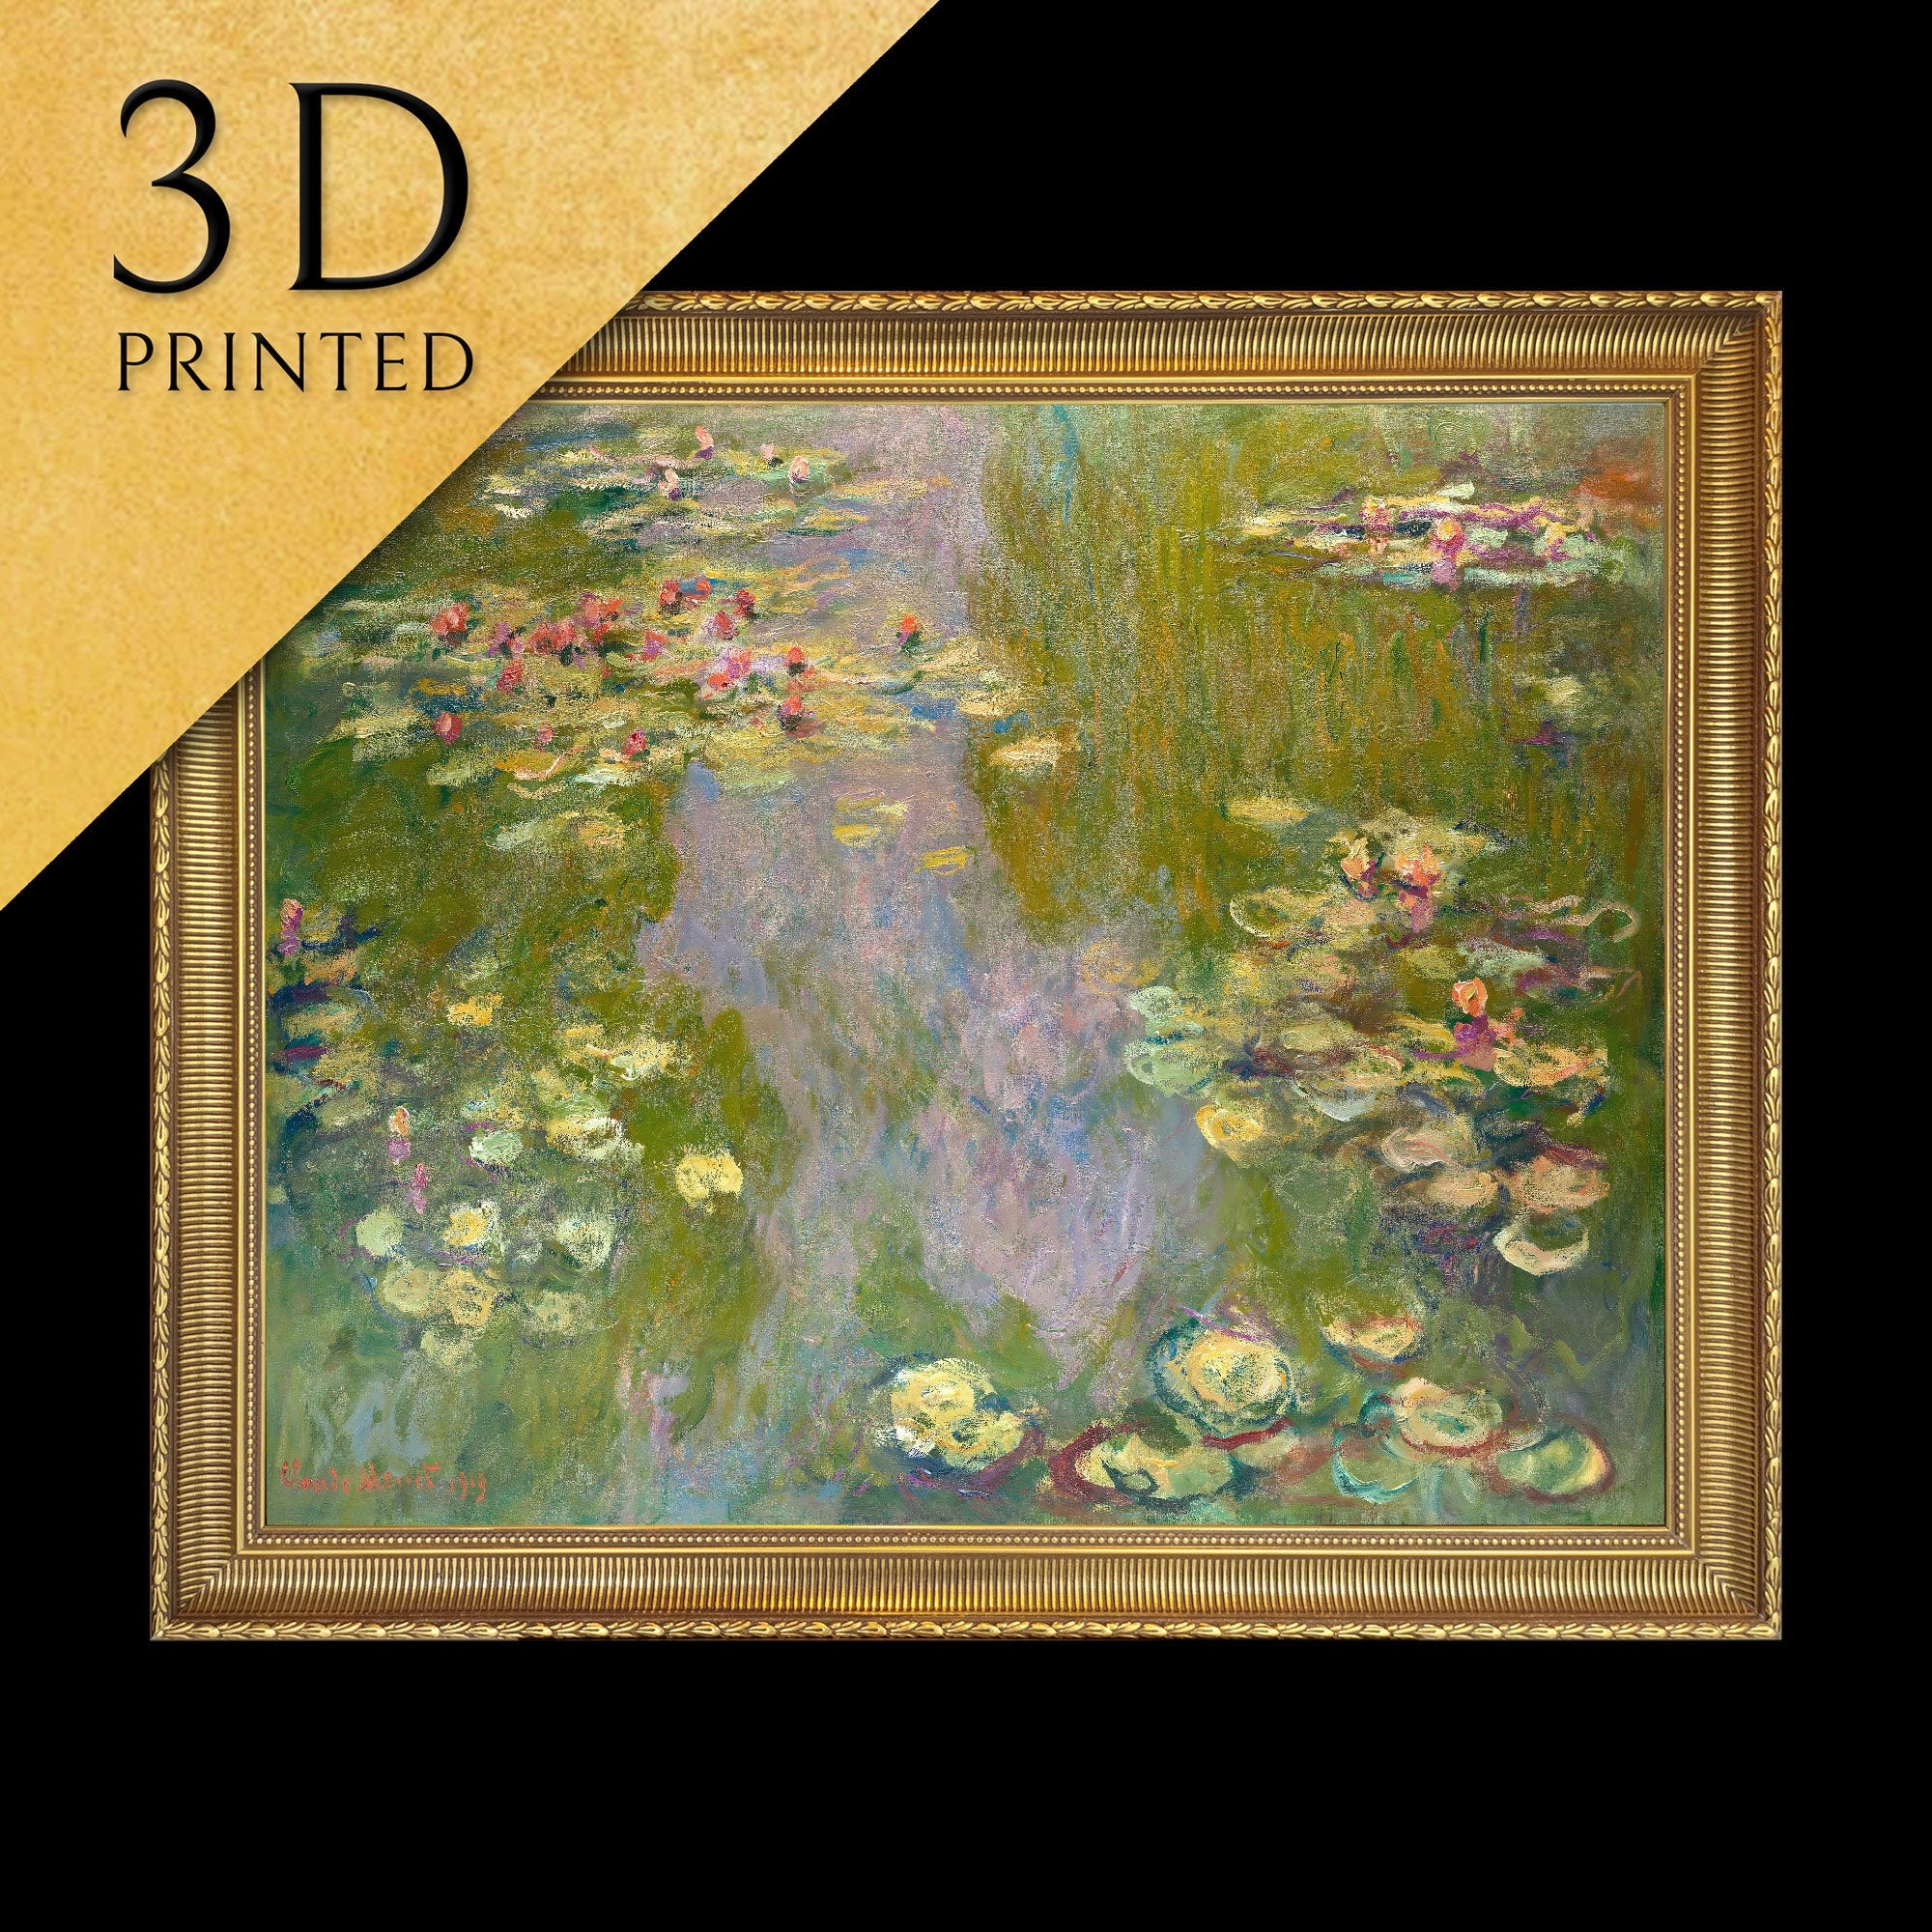 Water Lilies by Claude Monet, 3d Printed with texture and brush stroke